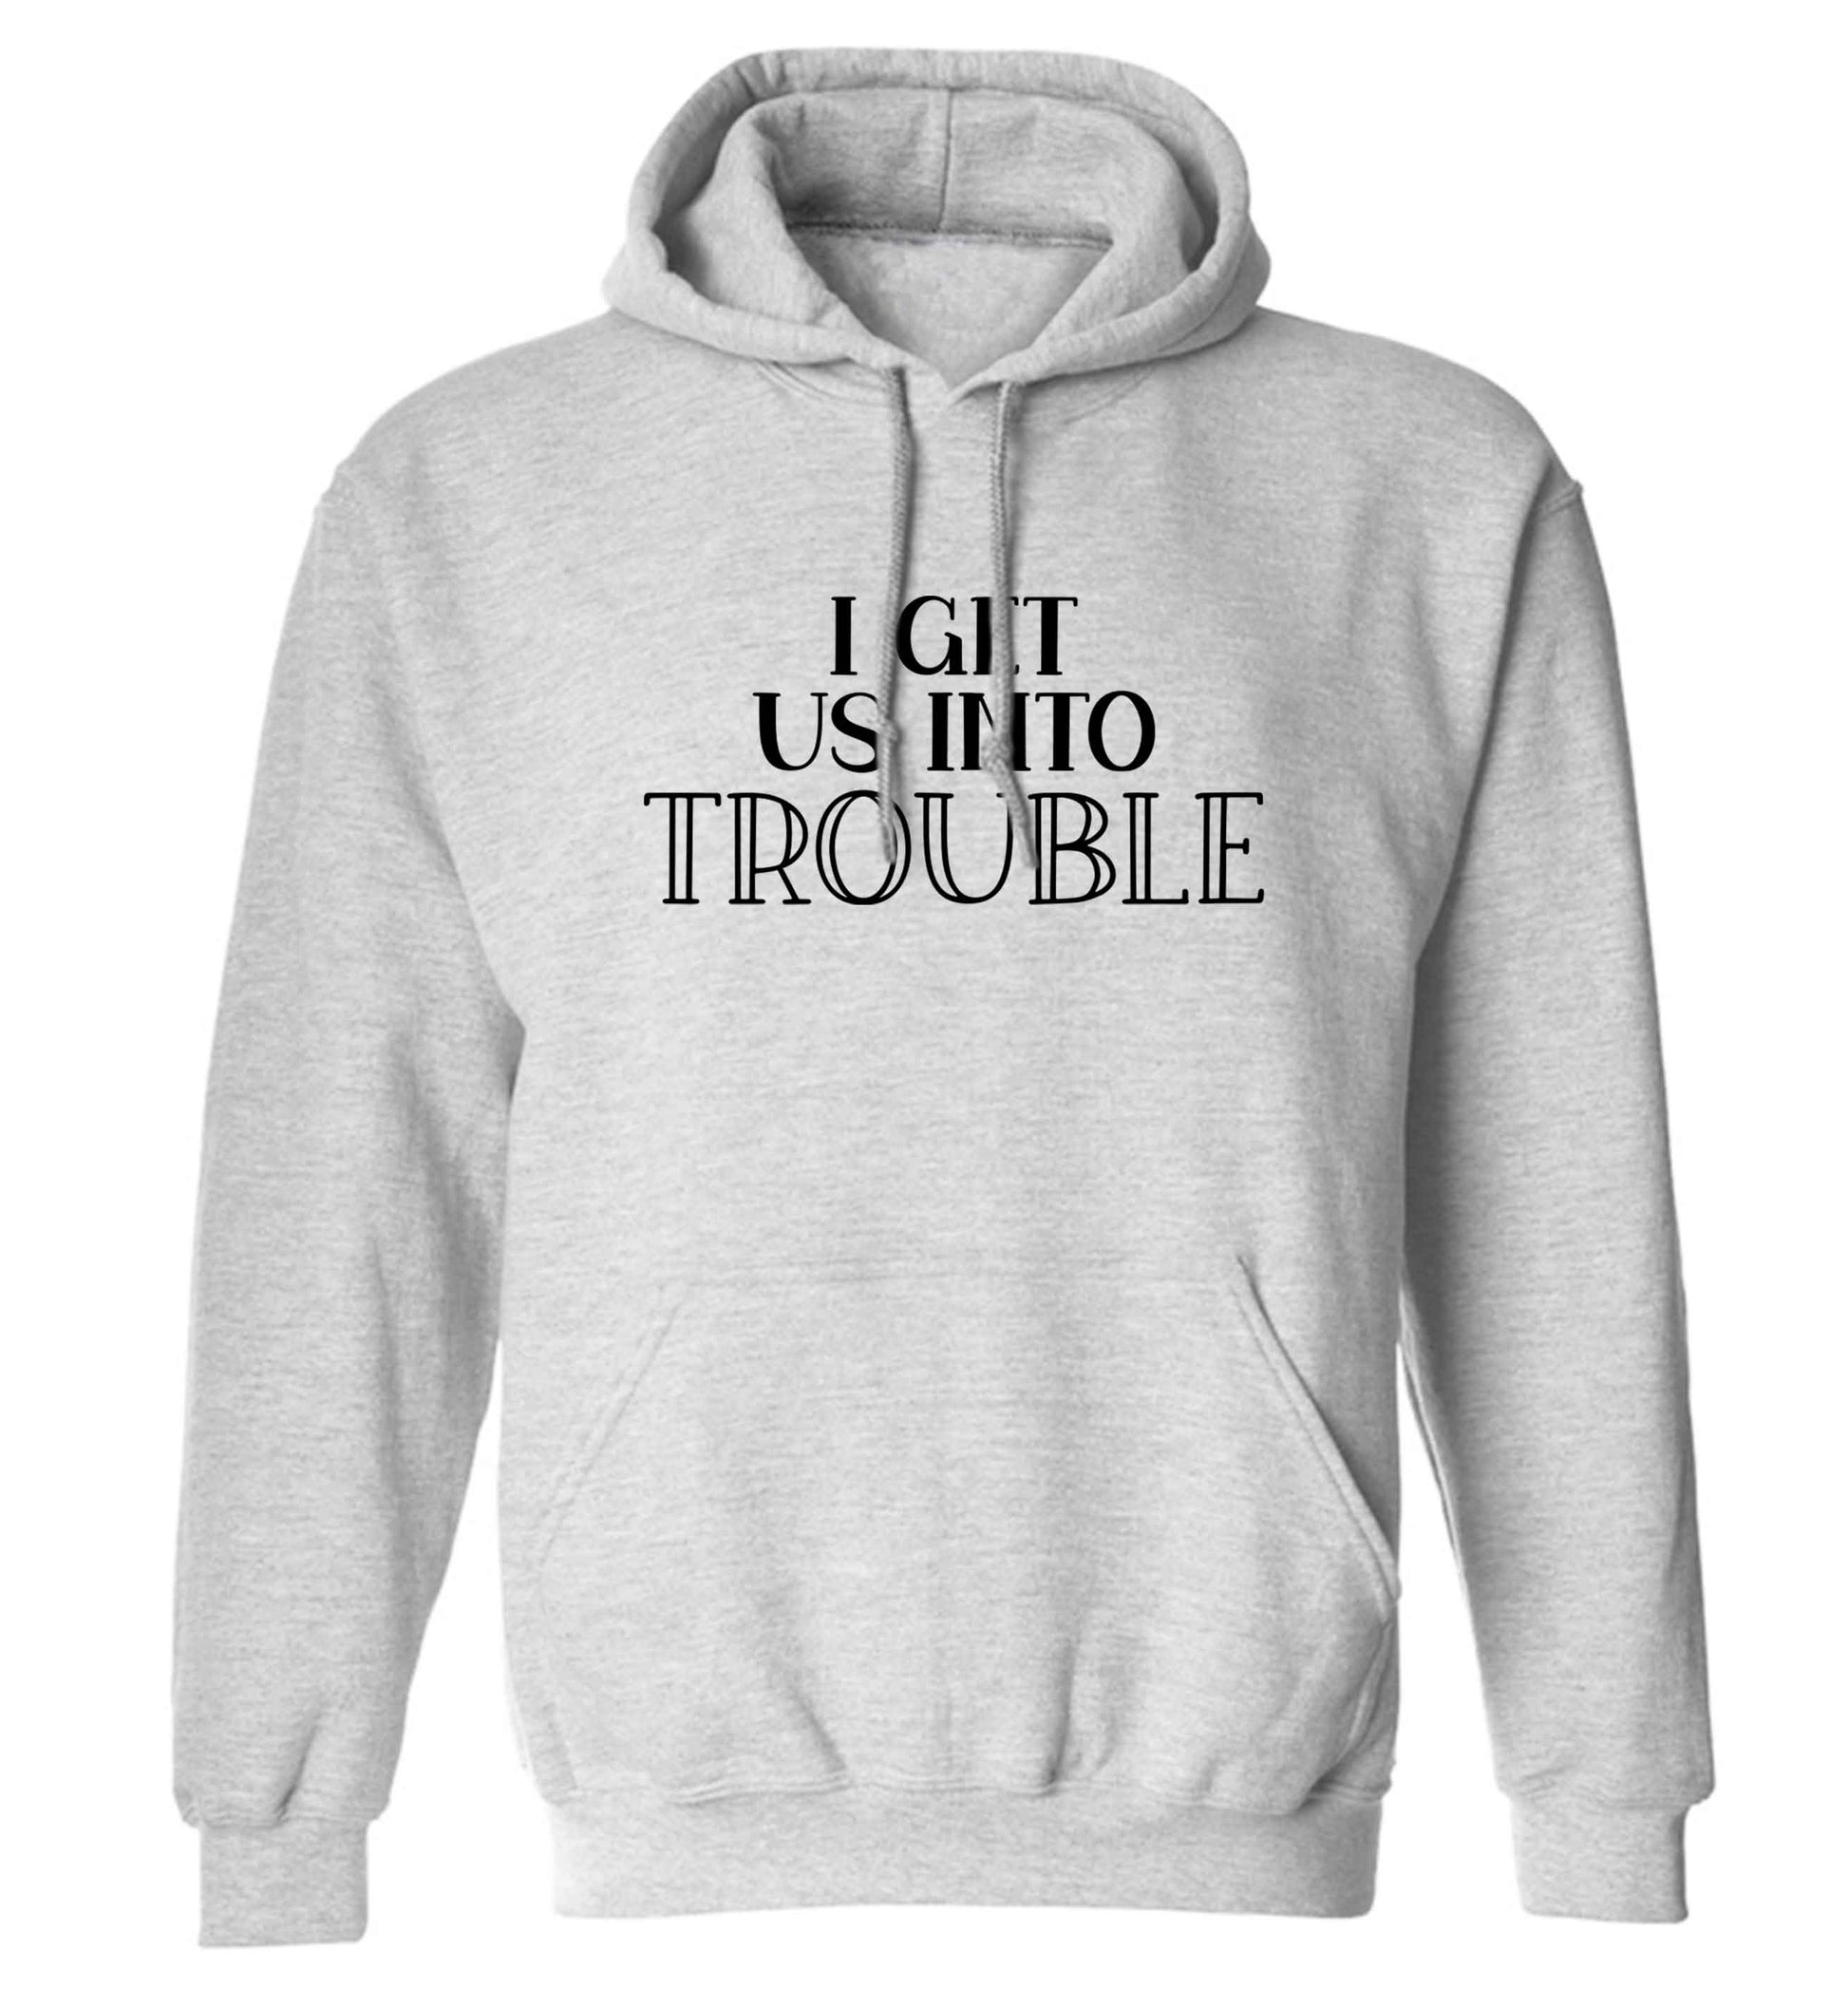 I get us into trouble adults unisex grey hoodie 2XL